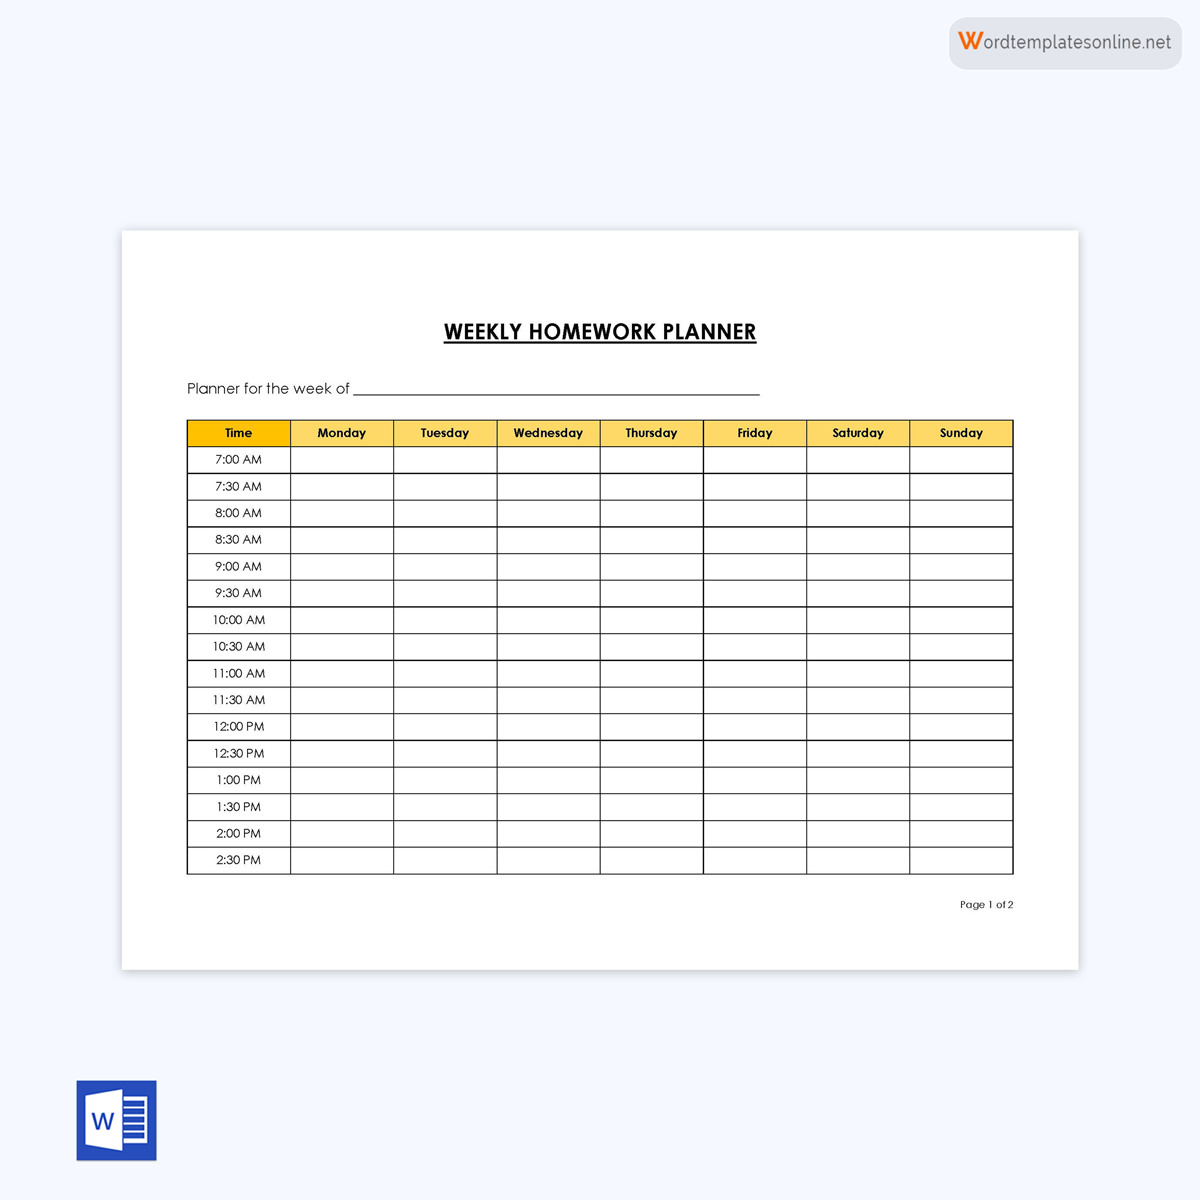 Homework planner example with PDF format